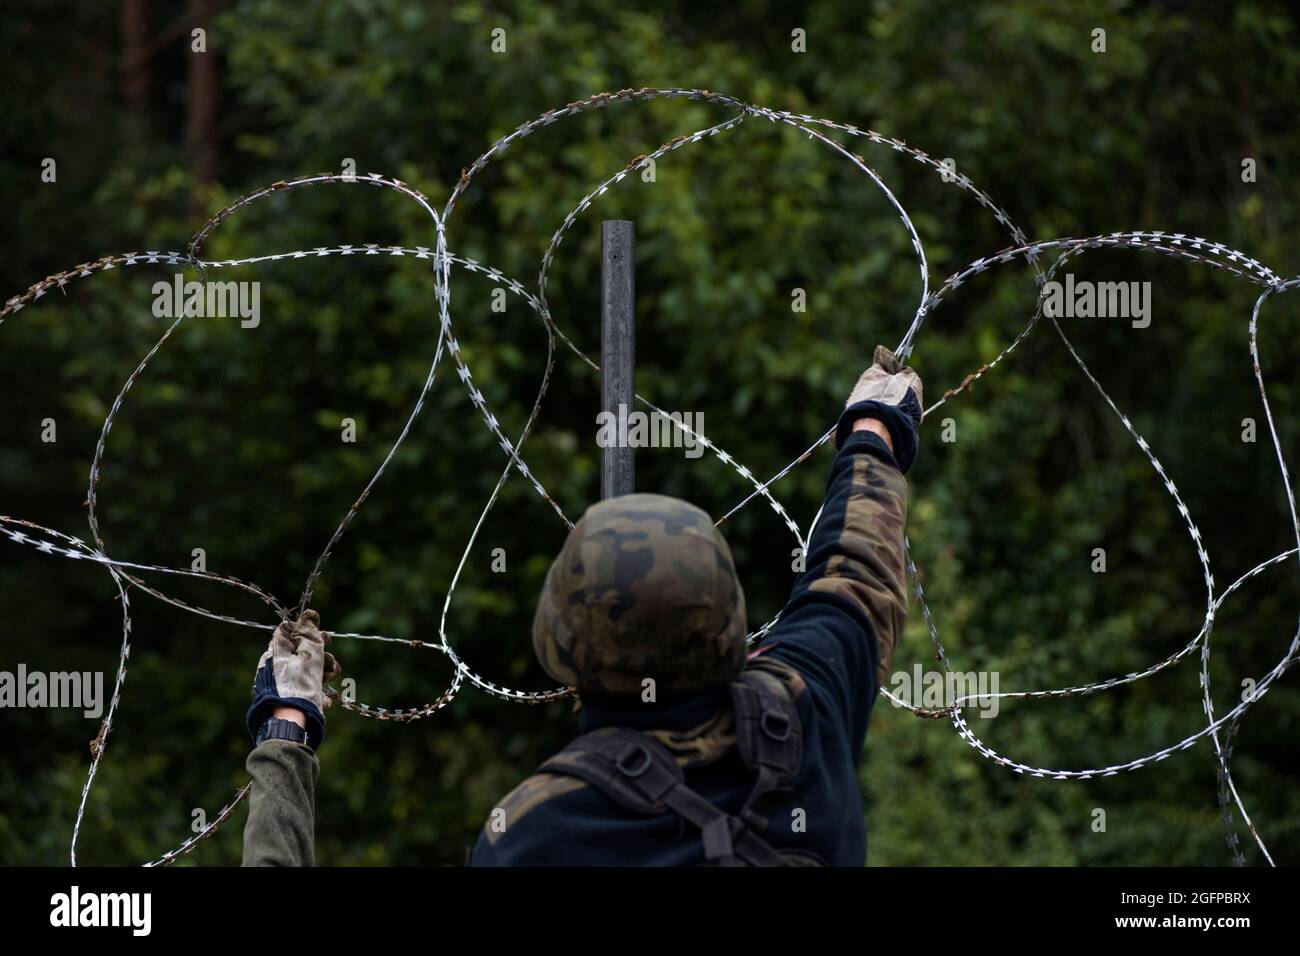 Zubrzyca Wielka, Poland. 26th Aug, 2021. Polish soldiers are seen building a fence along the border with Belarus.Polish army is building a 2.5 meters high barbed wire fence along its border and EU border at the same time with Belarus to stop the recent surge in illegal crossings, mainly by people from Iraq and Afghanistan. Warsaw and Brussels have accused Minsk of deliberately facilitating the passage of migrants into the European Union. (Photo by Attila Husejnow/SOPA Images/Sipa USA) Credit: Sipa USA/Alamy Live News Stock Photo